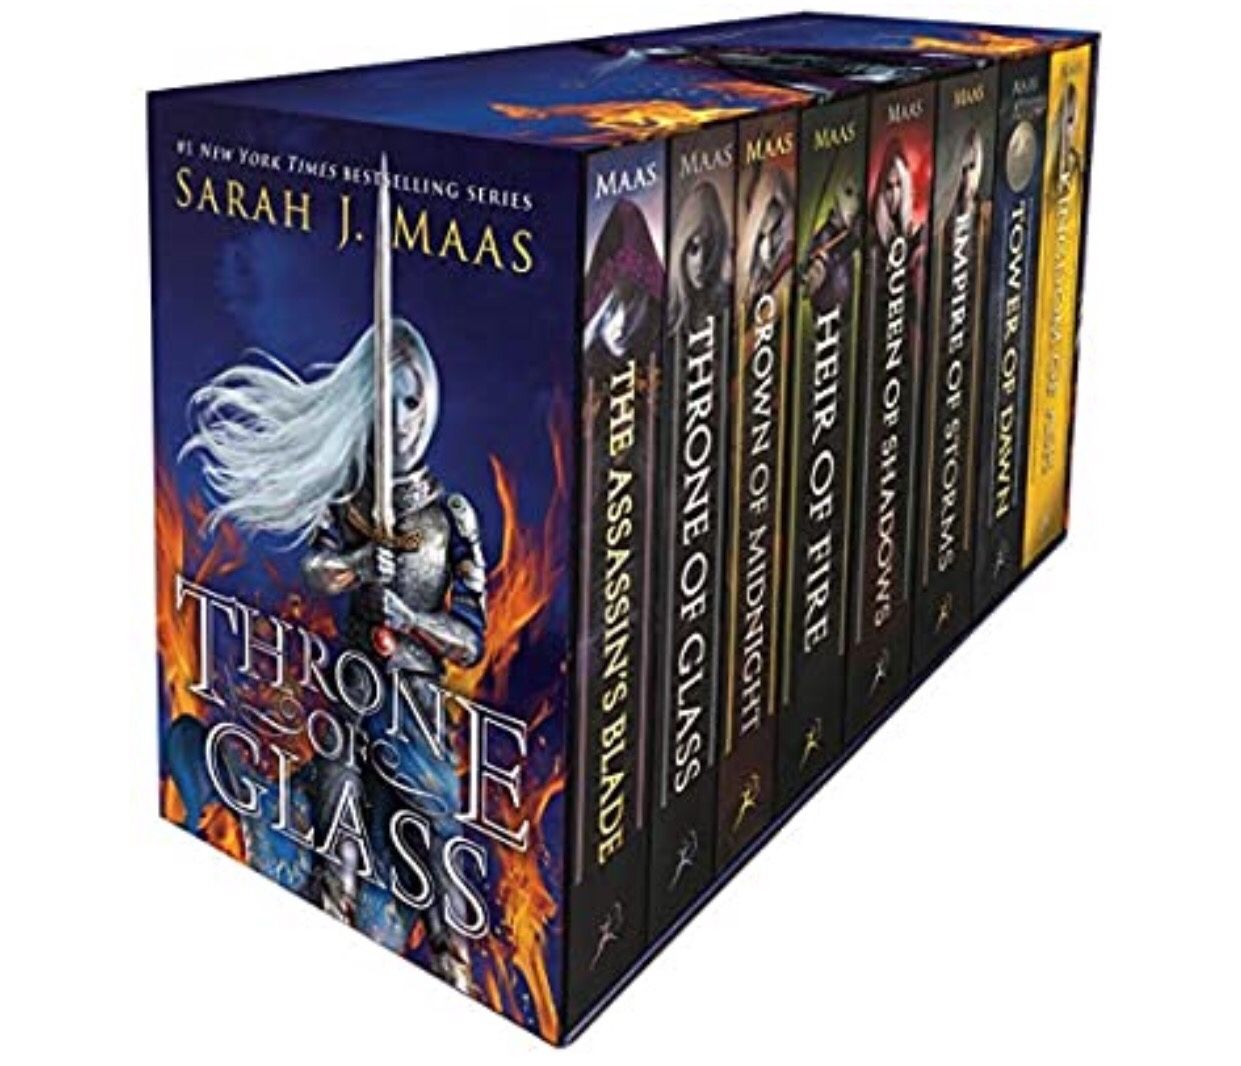 Throne of Glass Box Set-Paperback + A Court of Thorns & Roses box set (hardcover)